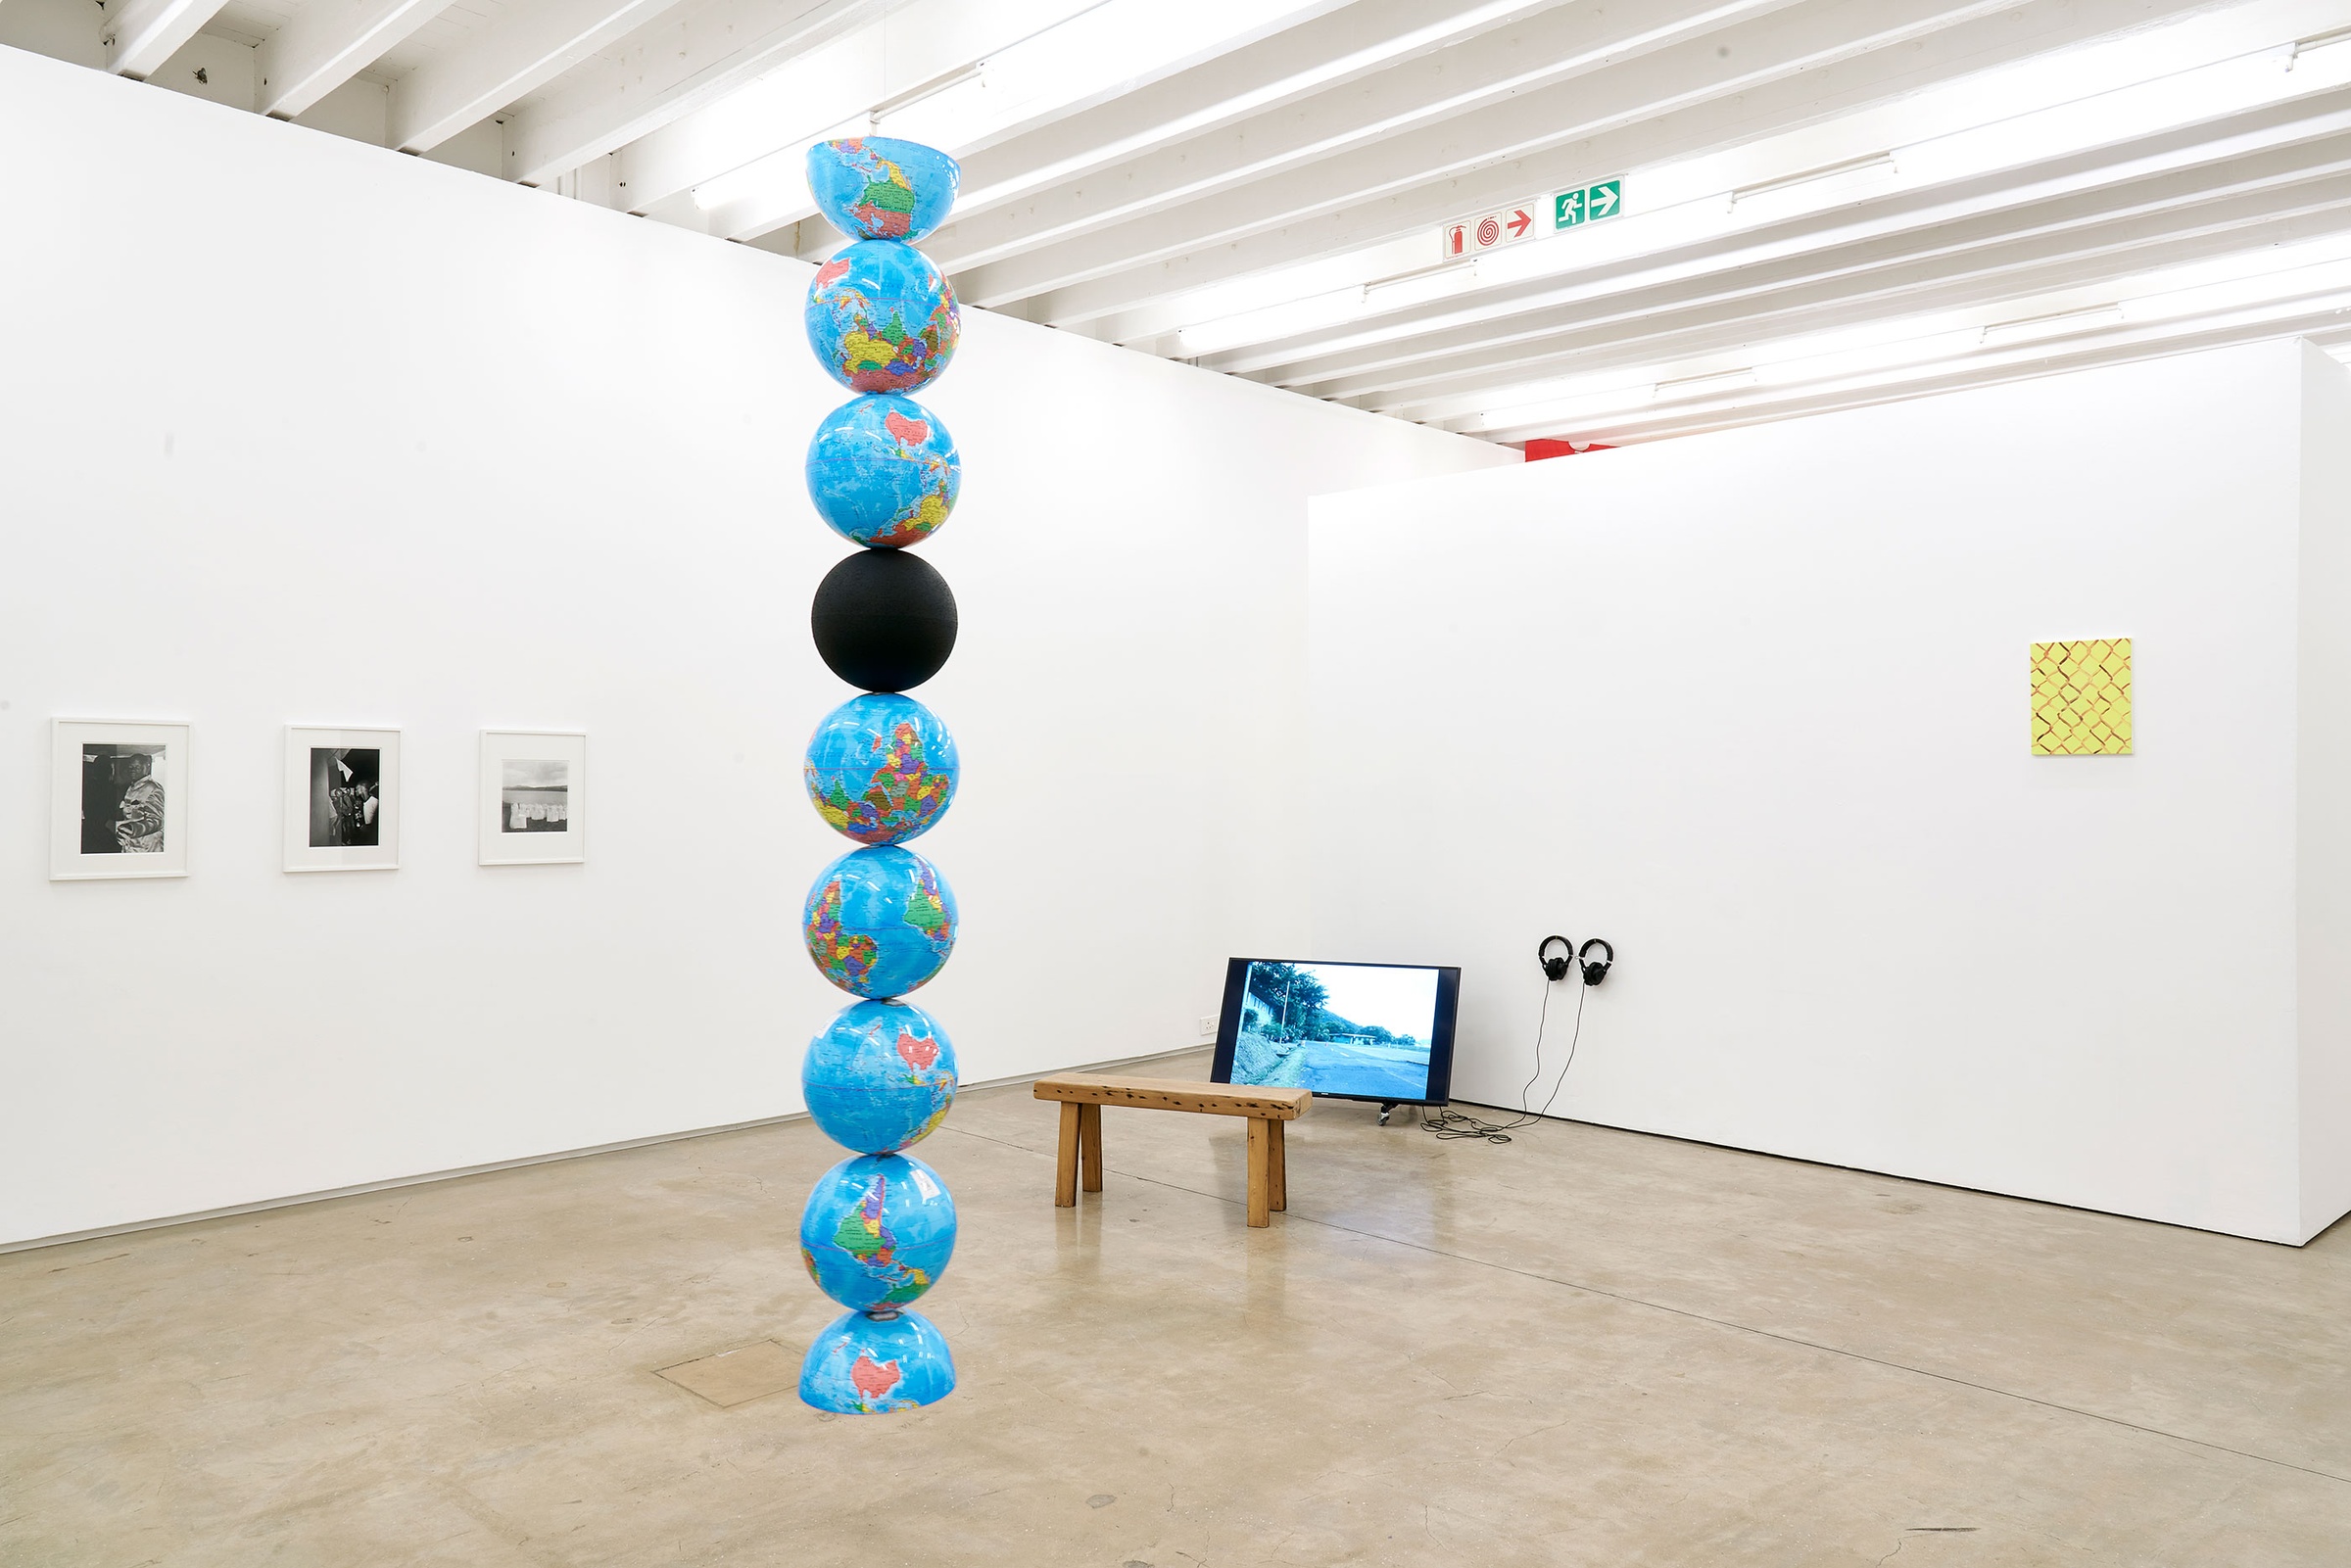 Installation photograph of Common exhibition. To the left, Nolan Oswald Dennis’ ‘model for an endless column,’ a column of globe models suspended from the ceiling. One is solid black, the first and last are halved. On the right, a video screen playing Francis Alÿs’ ‘Painting/Retoque’ sits on the floor, with earphones and bench.
